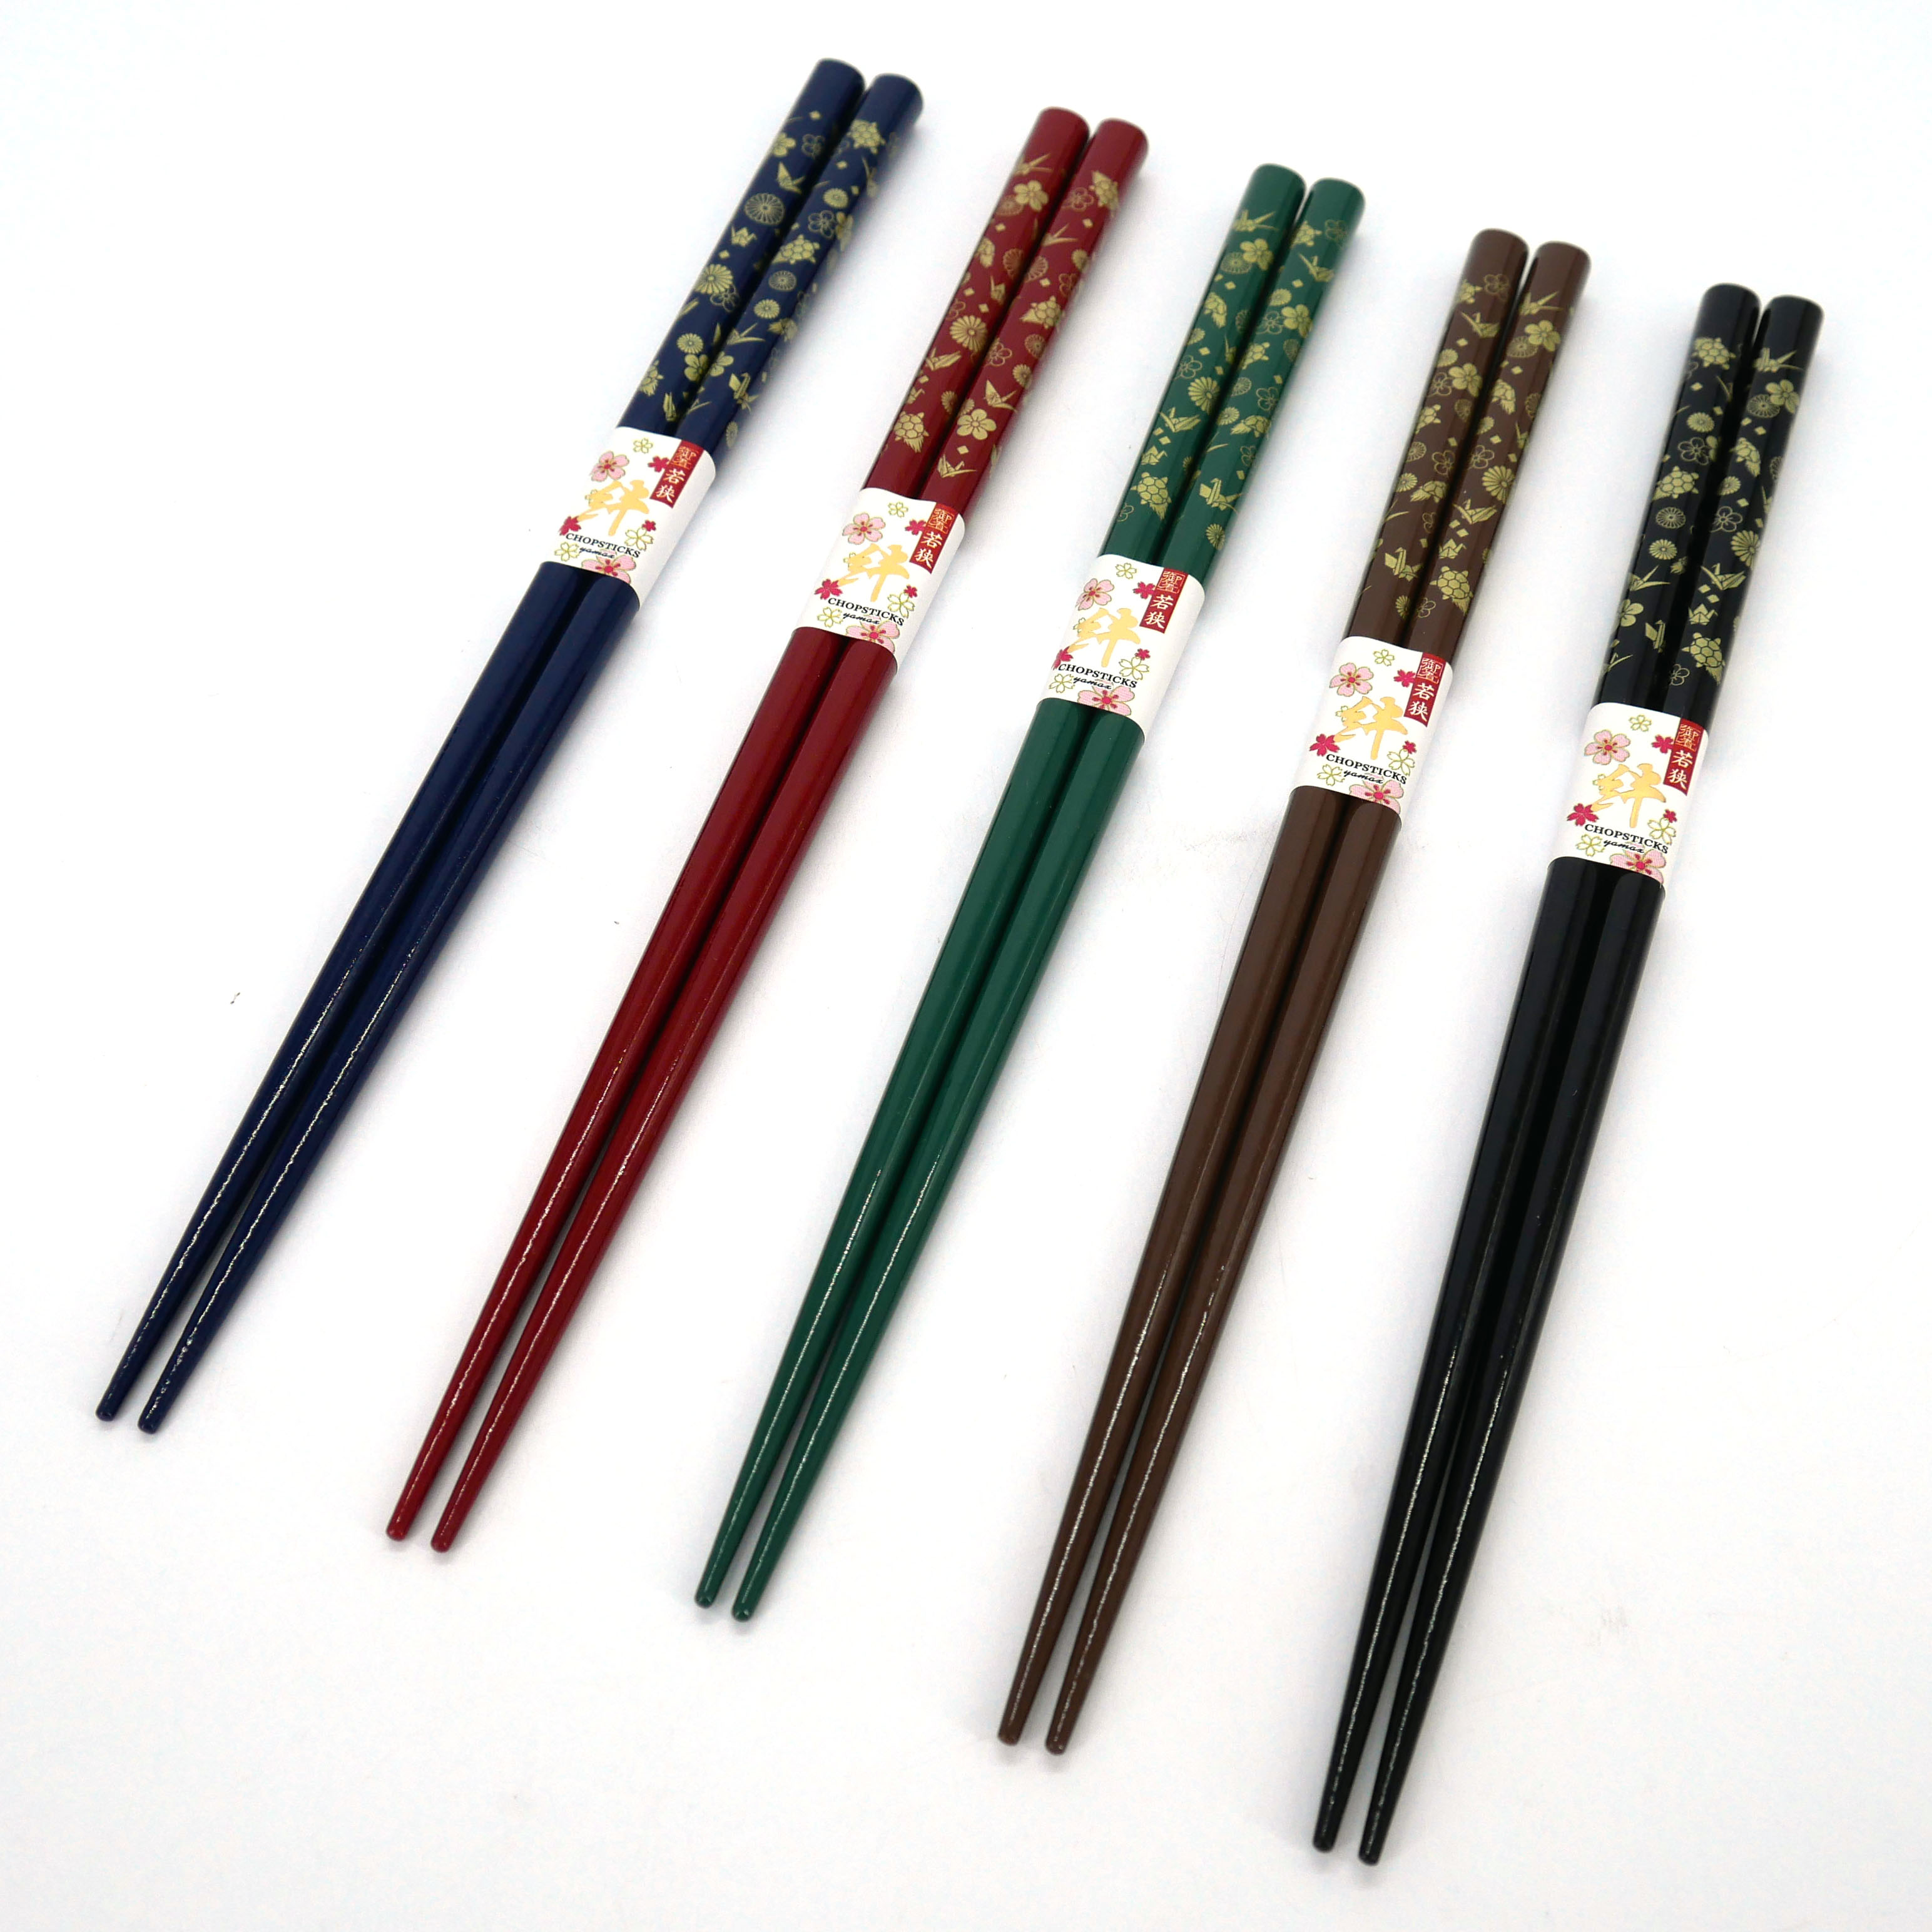 https://kyotoboutique.fr/37274/pair-of-japanese-chopsticks-crane-and-turtle-pattern-kame-color-of-your-choice-23-cm.jpg